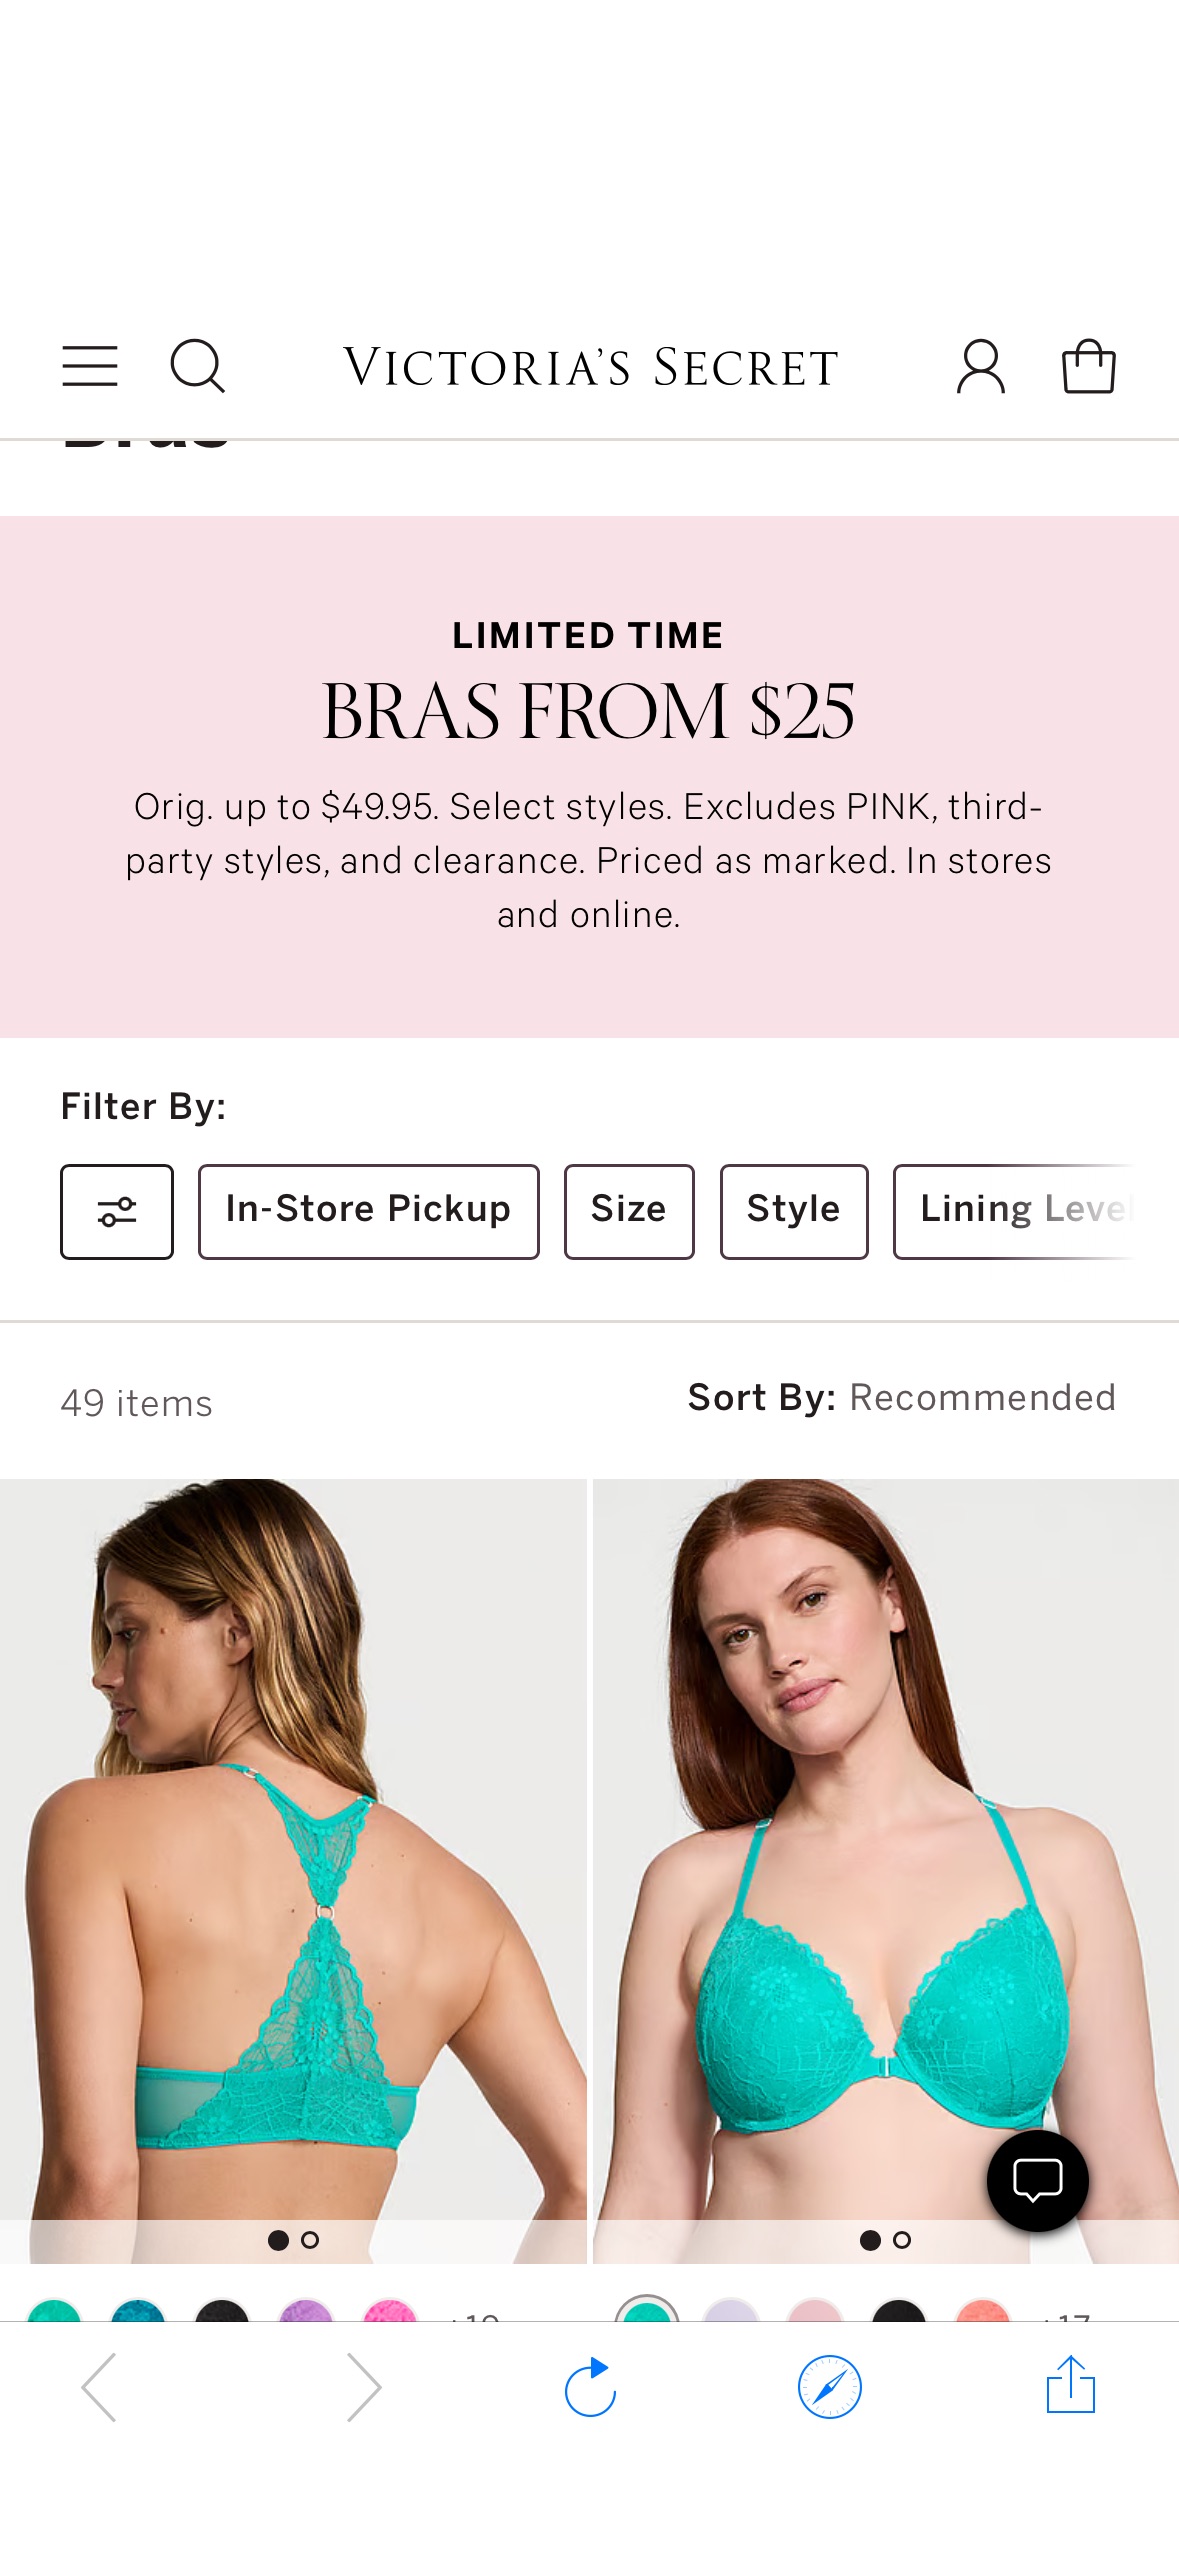 LIMITED TIME
BRAS FROM $25